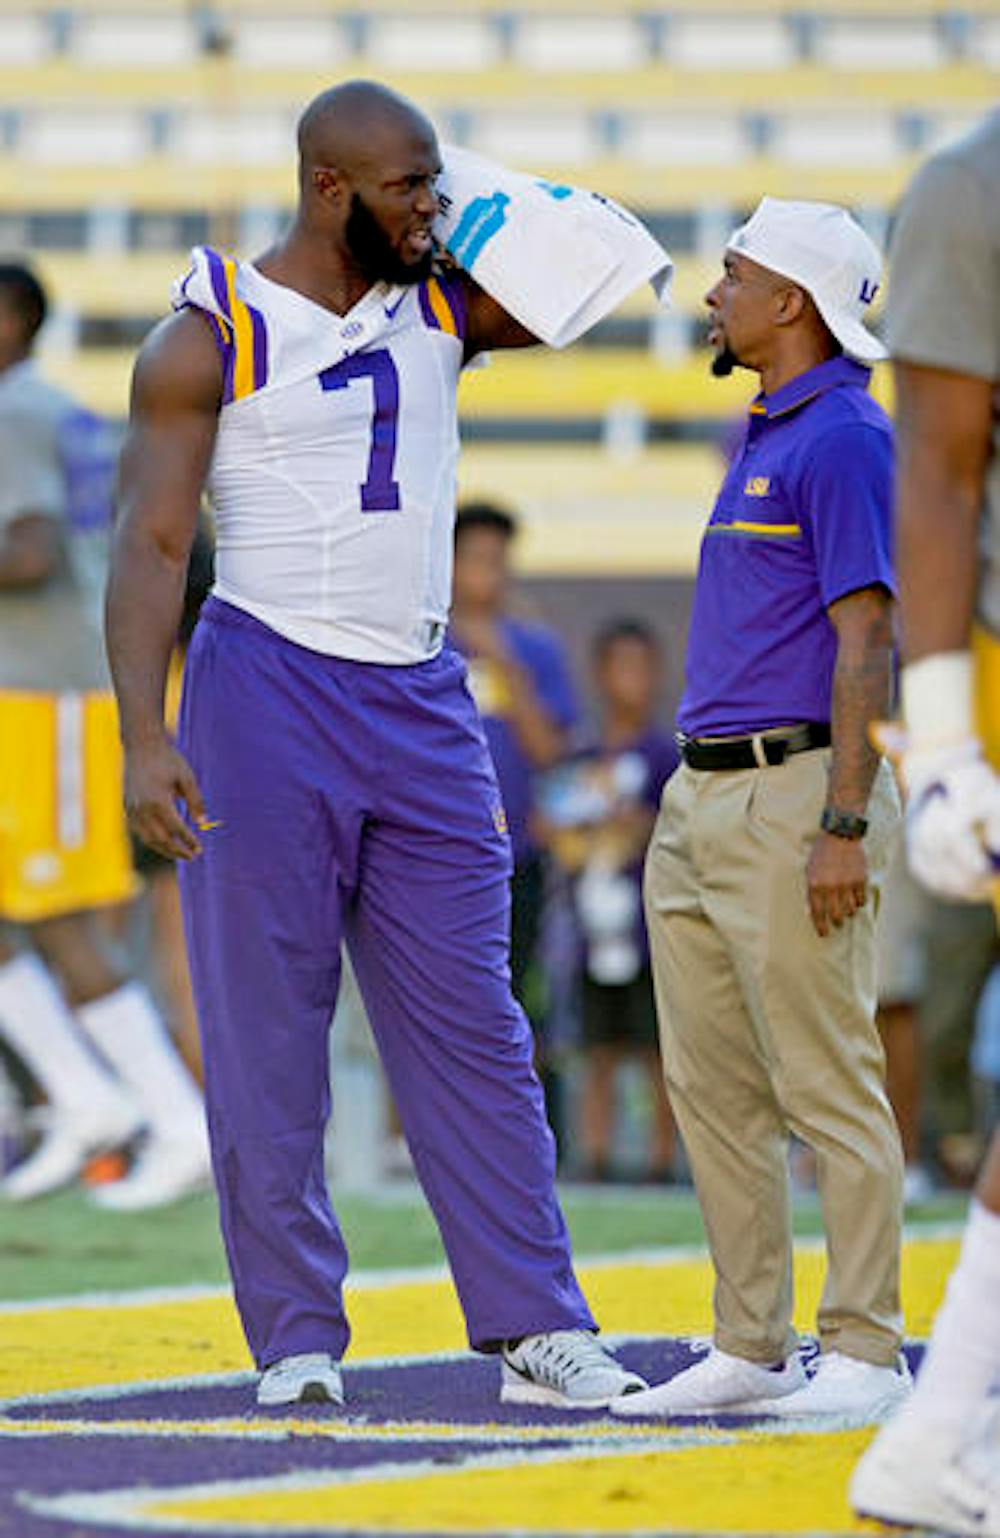 <p>Leonard Fournette (7) chats on the field before an NCAA college football game against Missouri in Baton Rouge, Louisiana, on Oct. 1, 2016.</p>